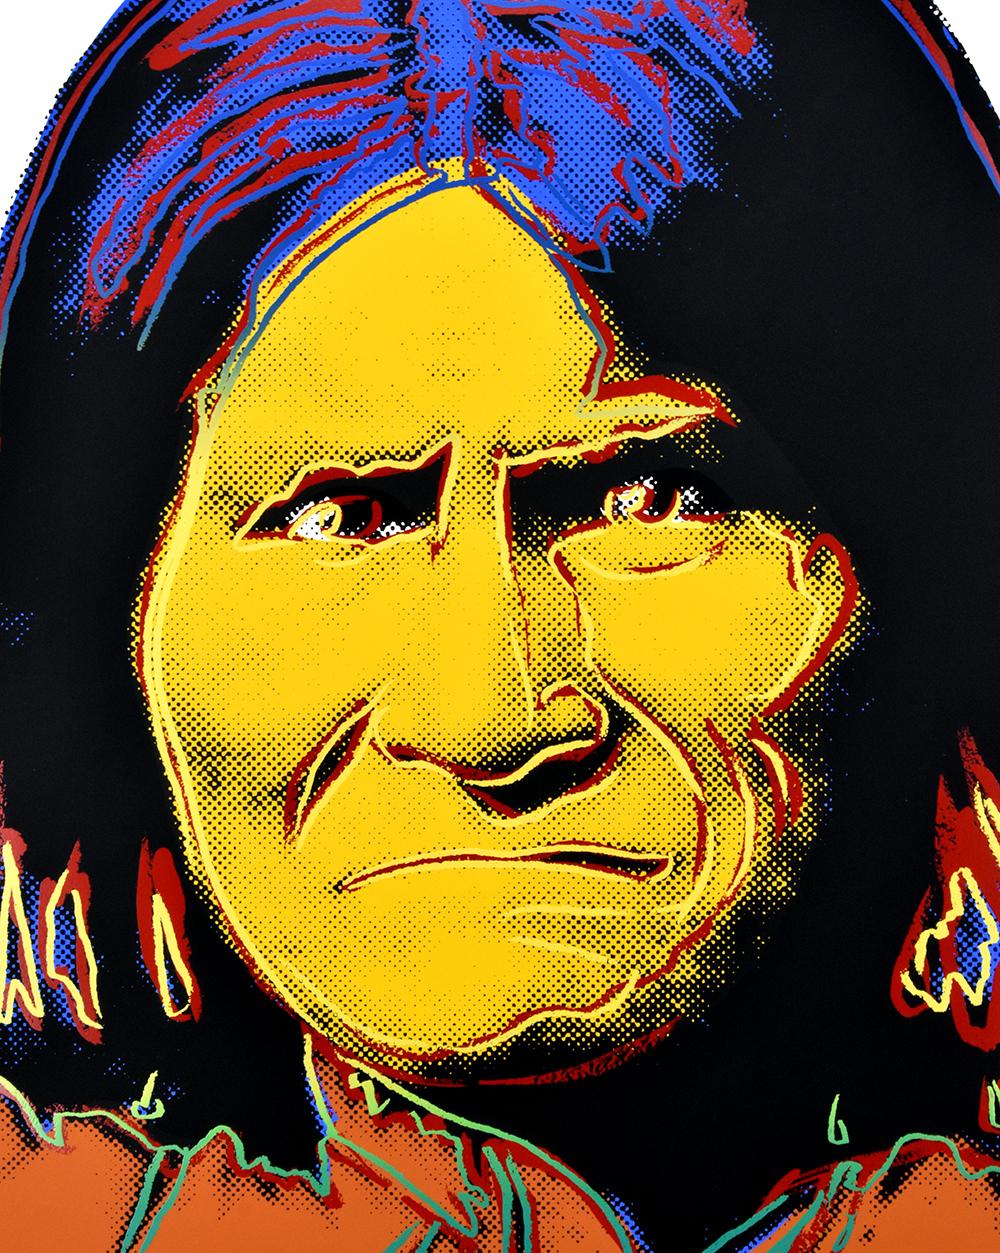 Andy Warhol Geronimo, 1986 is a stunning portrait of the Apache leader and medicine man. He is commanding and gazes directly at the viewer with piercing eyes. His strong facial features are outlined in yellow contours. The fiery yellow, red, and